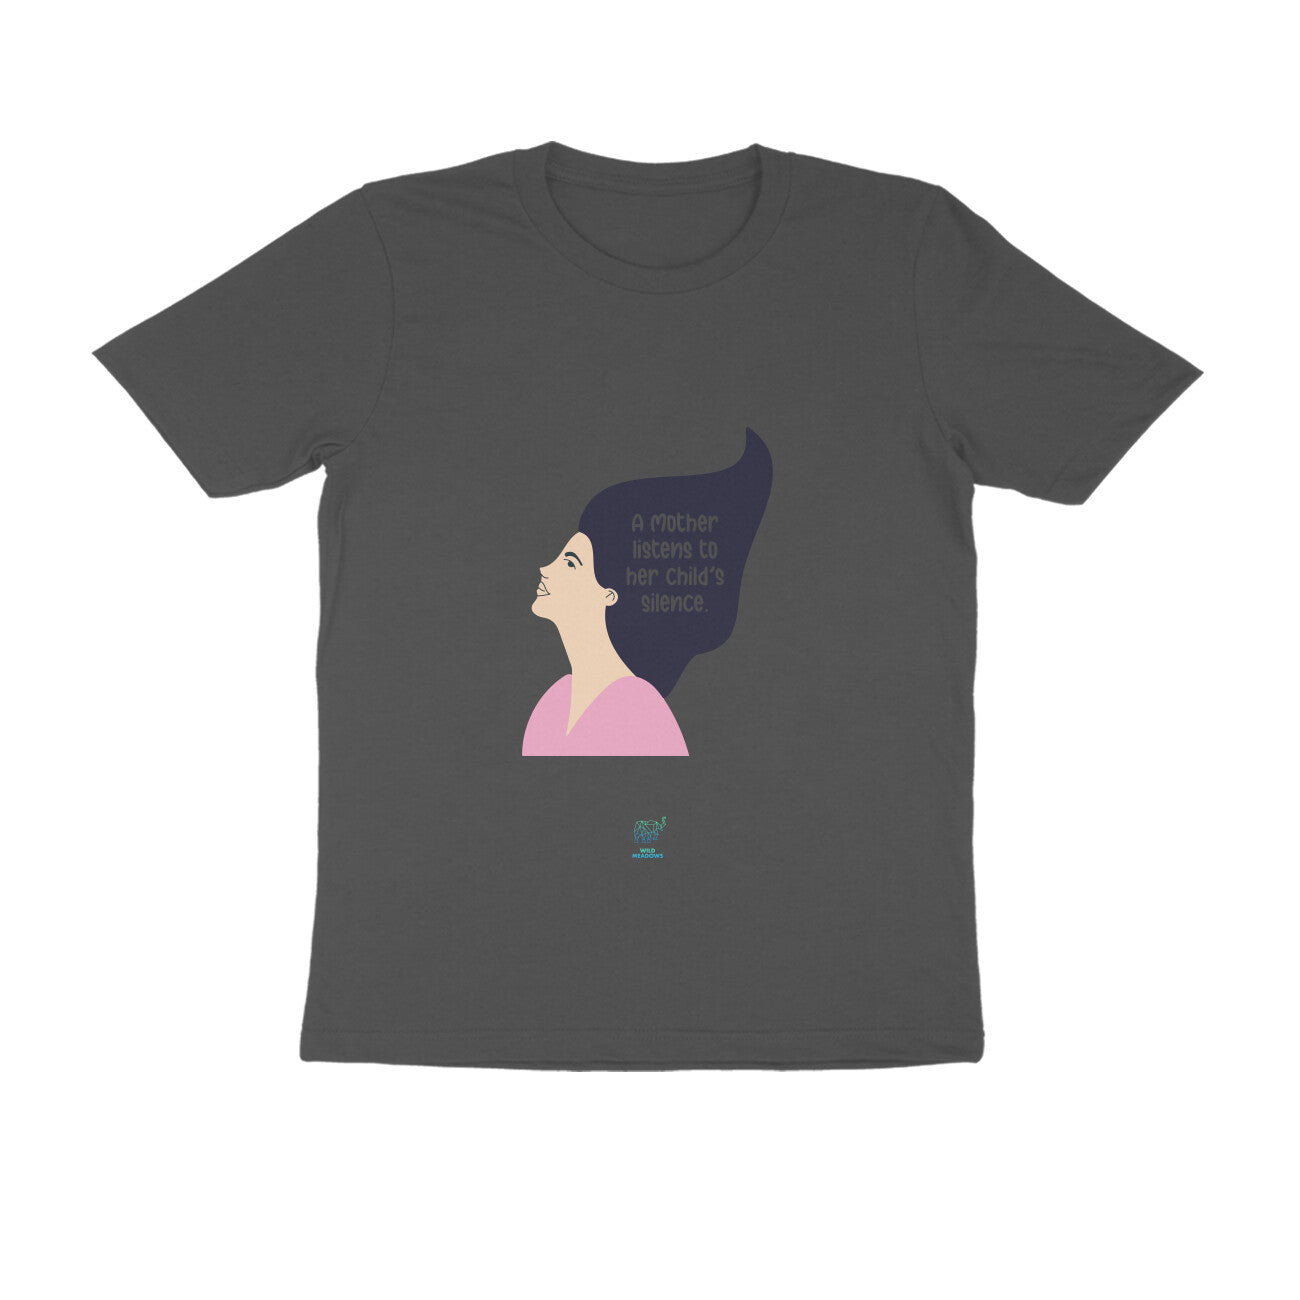 MOM -listens to her child's silence-Round Neck Unisex Tees